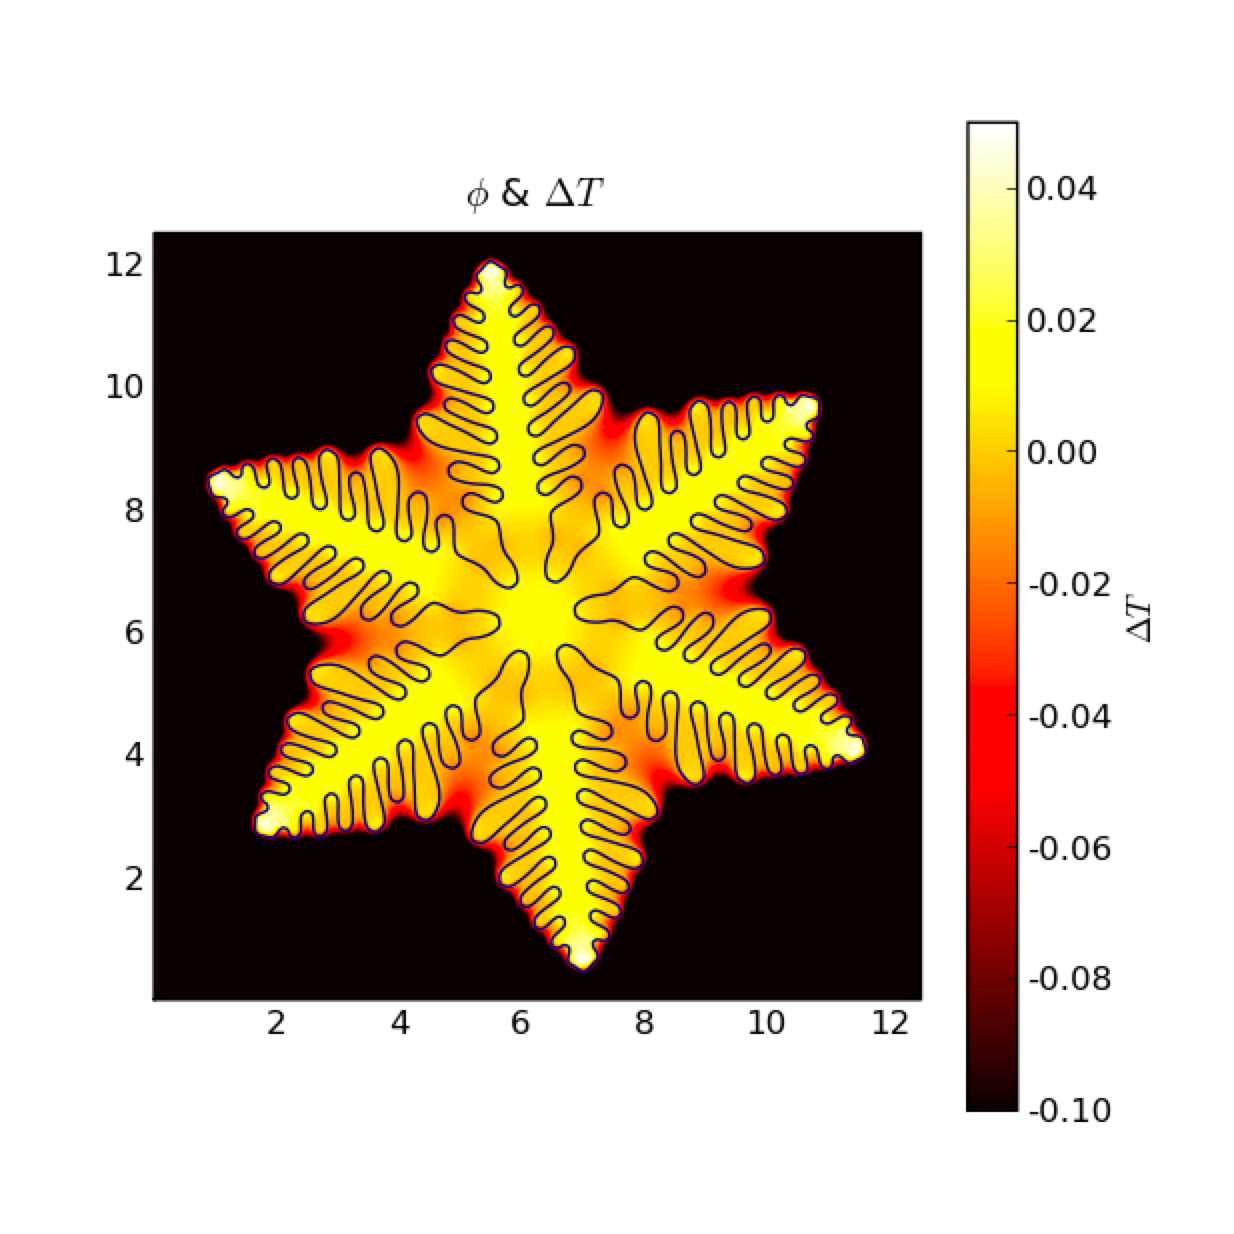 phase field and undercooling during solidification of a 6-fold "snowflake" anisotropic seed